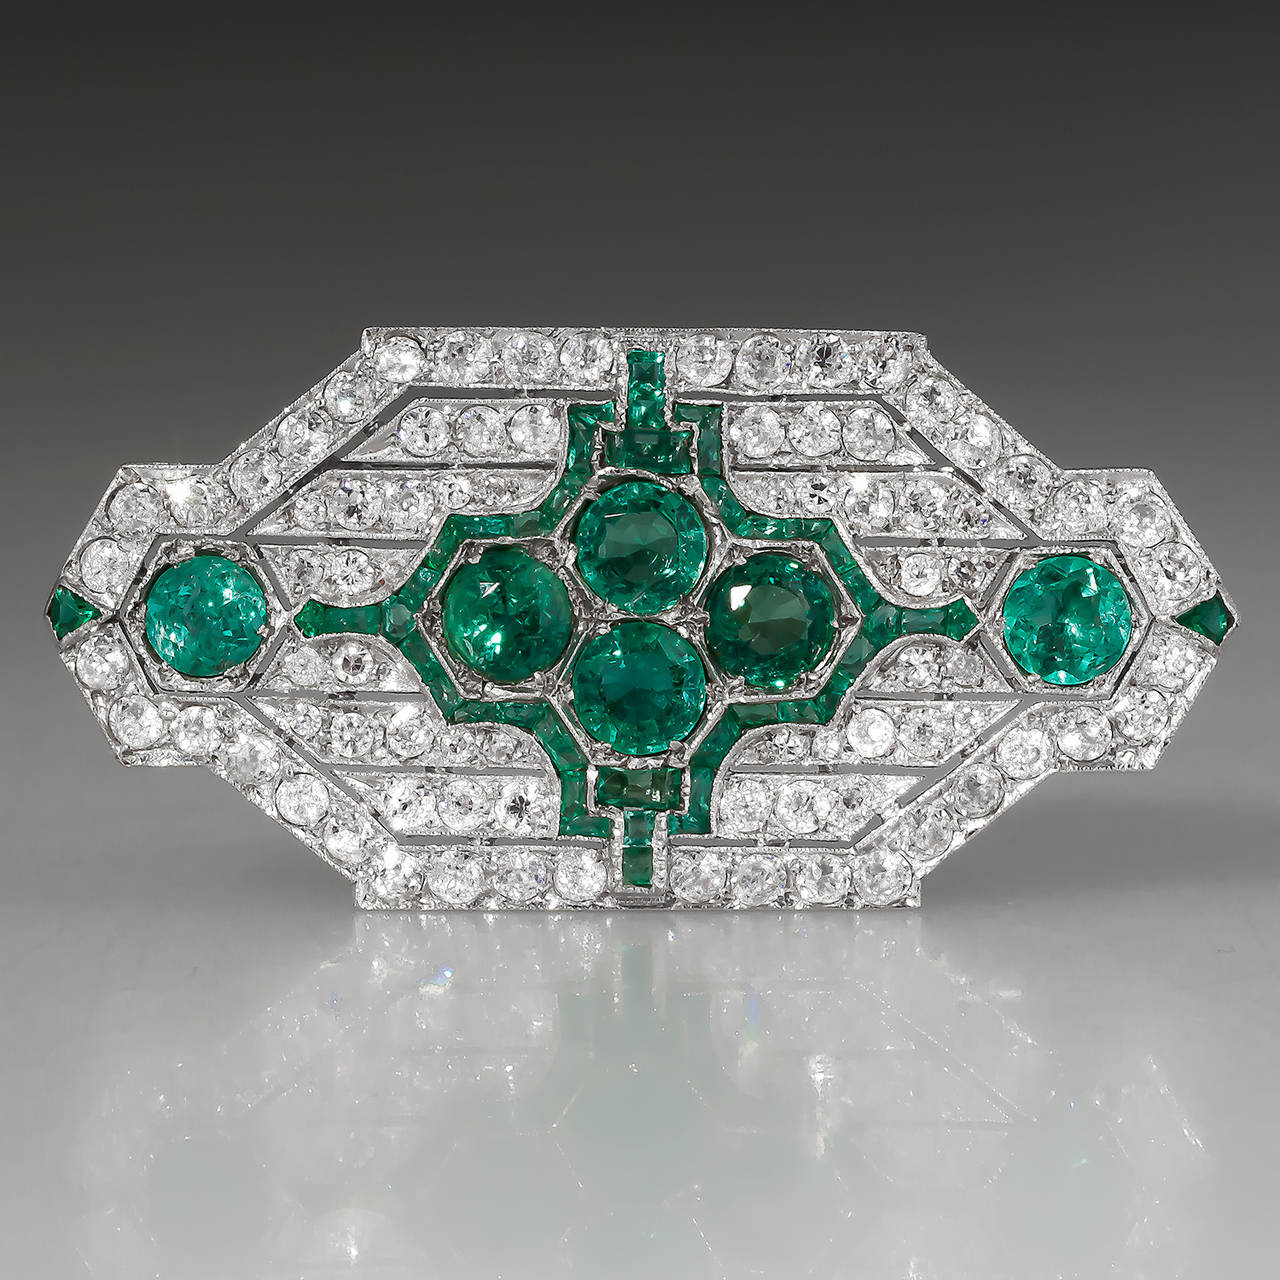 This amazing Art Deco antique brooch pin is crafted of solid platinum and features natural emeralds and diamonds. The emeralds are gorgeous with strong saturation and a slightly bluish green hue. The emeralds total a bit over 4.5 carats and the